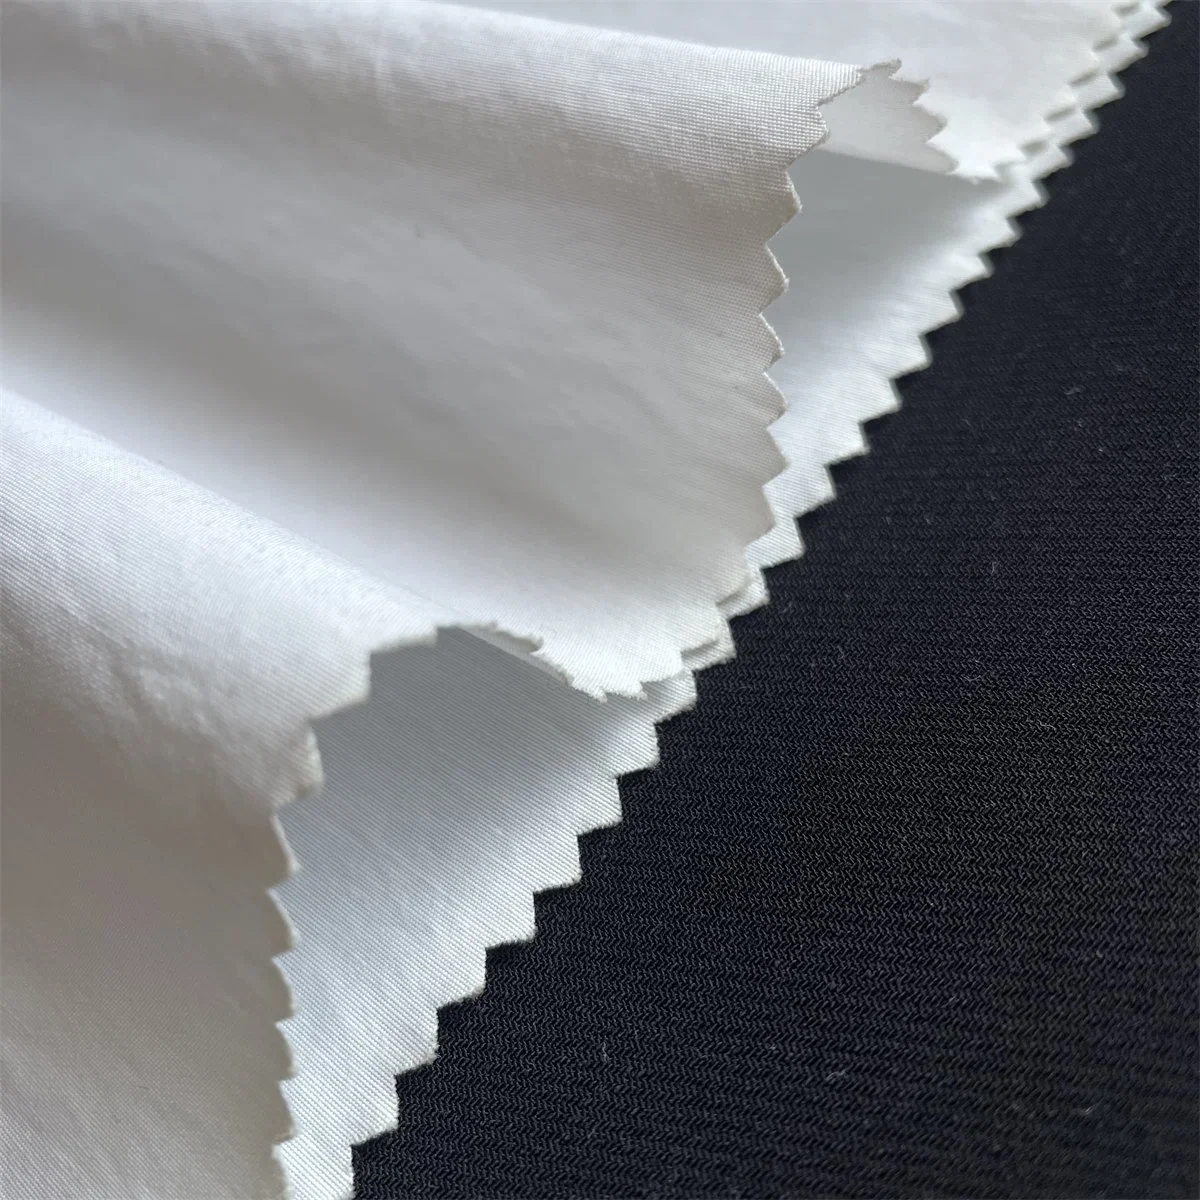 Full-Dull 32s Cotton/Nylon Plain Weave Whitening Fabric for Pants and Casual Cloth